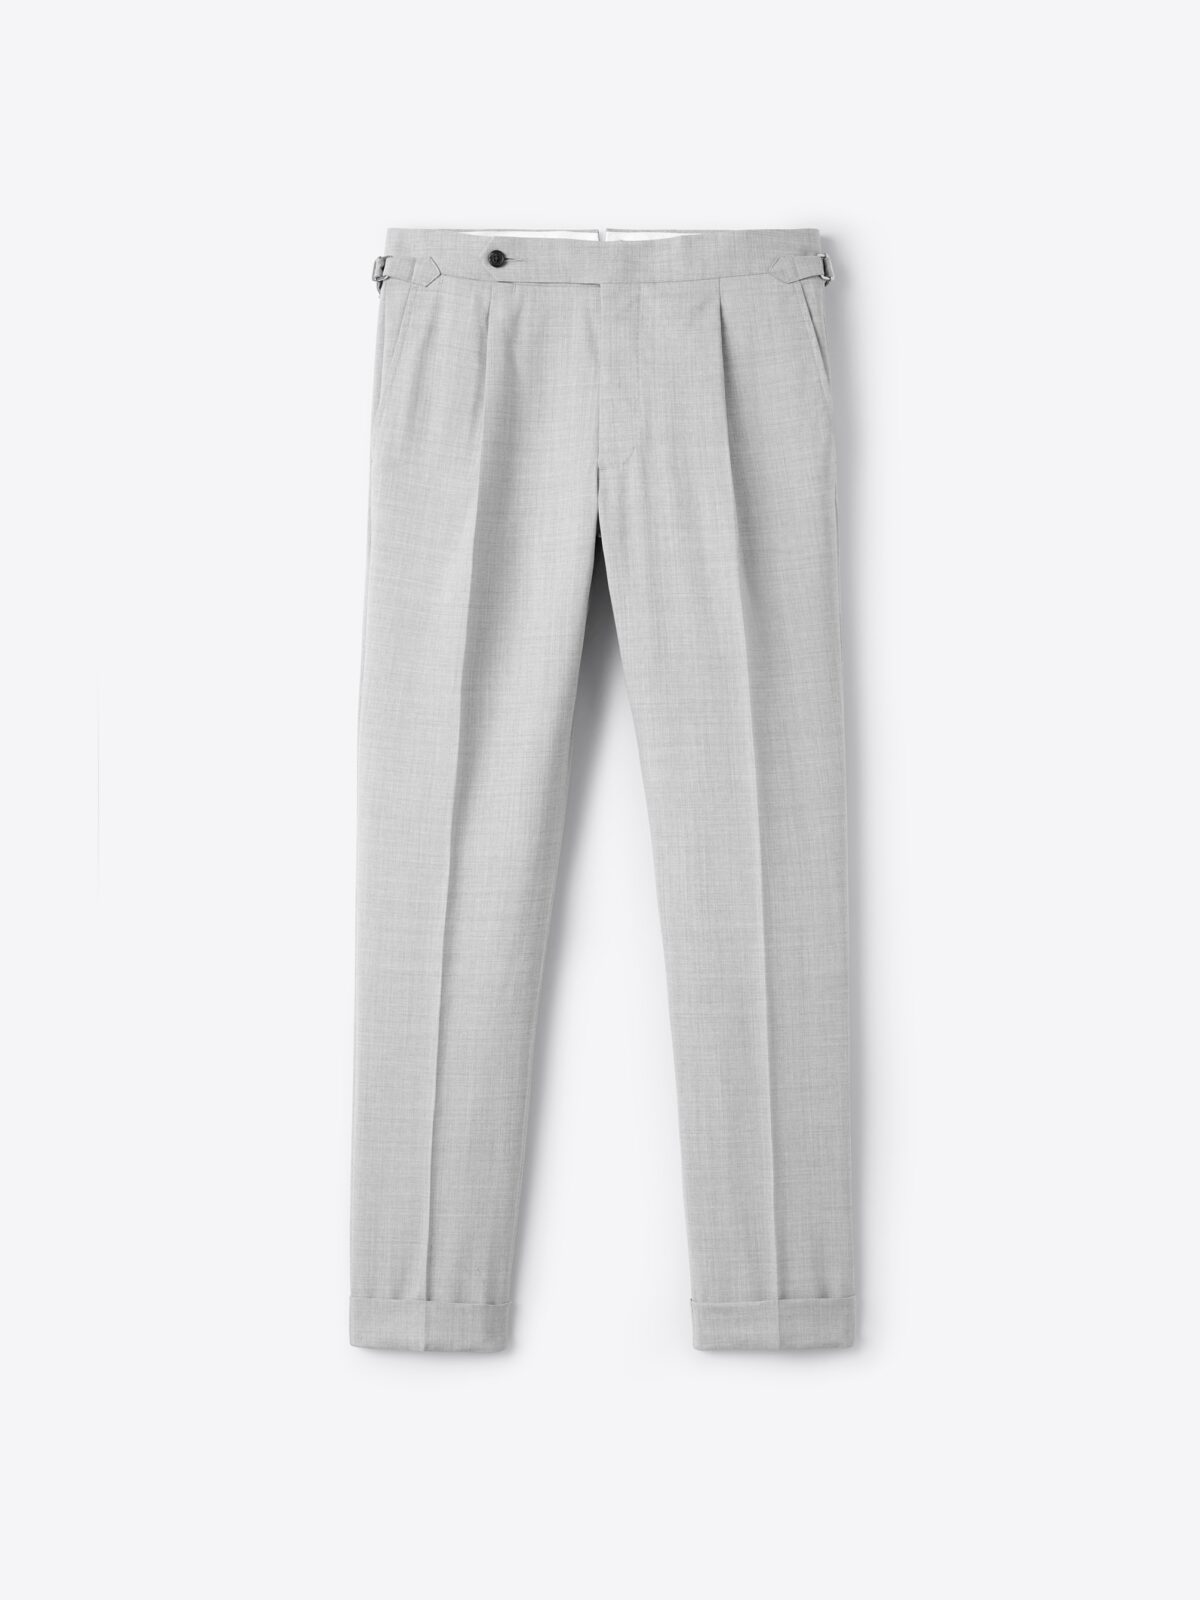 STRAIGHT FIT LONG LENGTH SATIN TROUSERS - Pearl grey